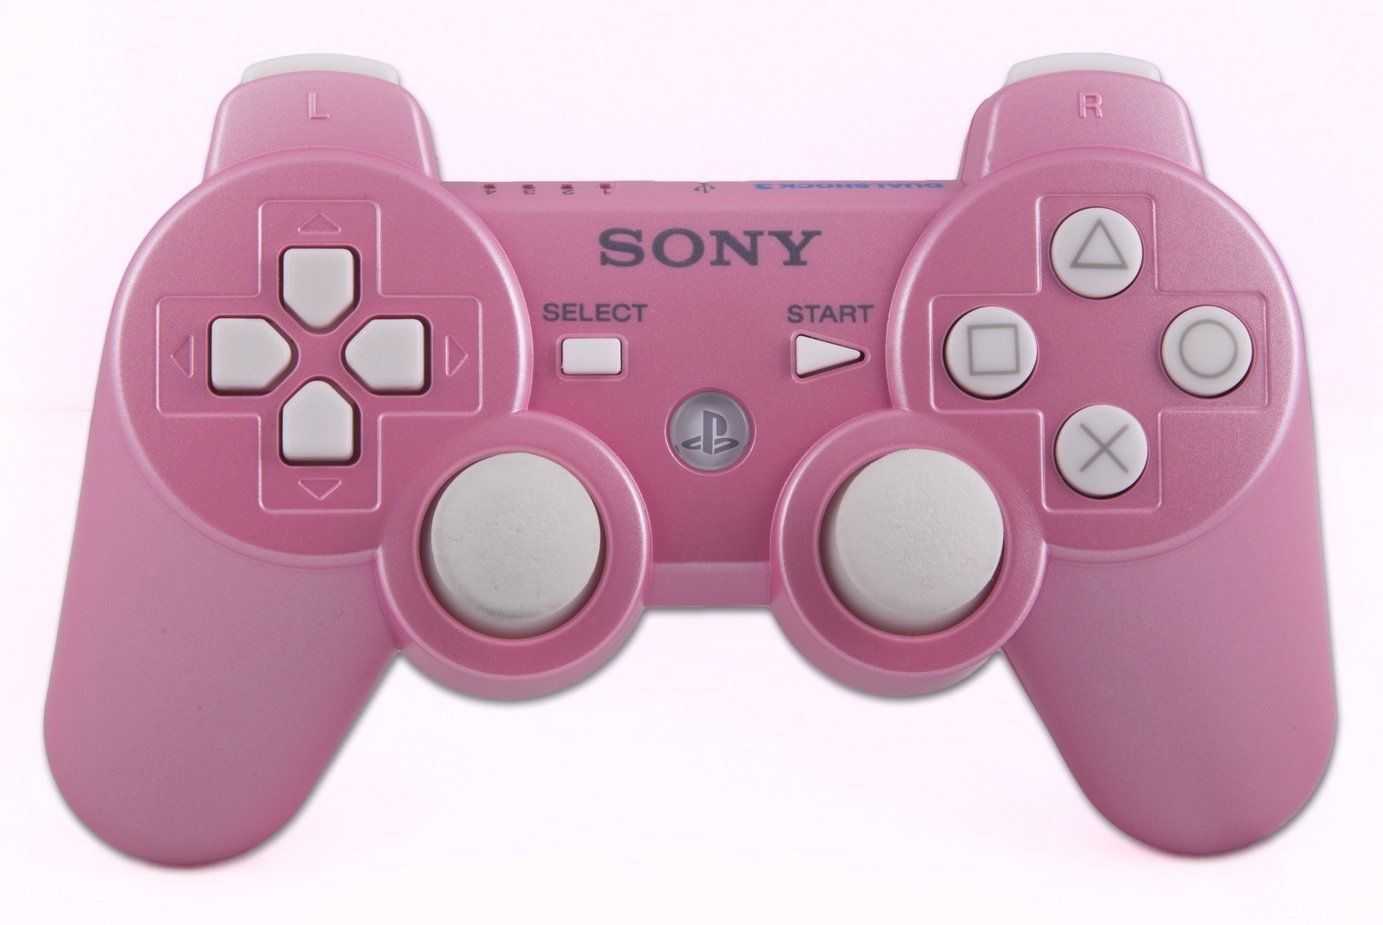 Pink ps3 controller with white buttons. Gaming products, Ps3